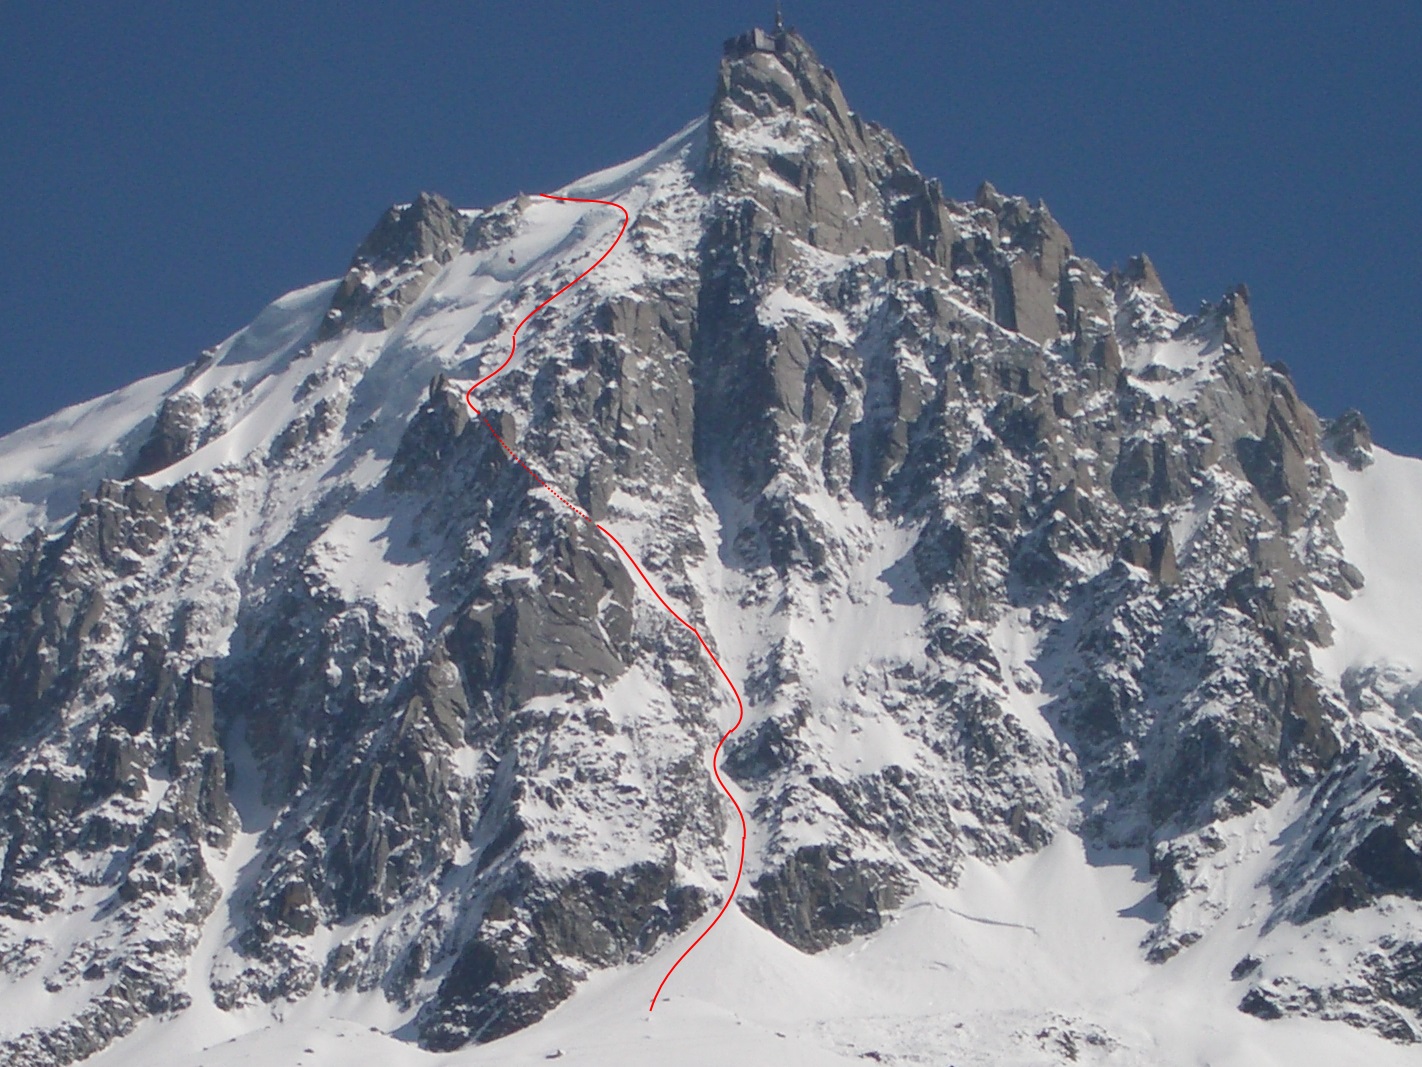 The Eugster Couloir on the N Face of the Aiguille du Midi